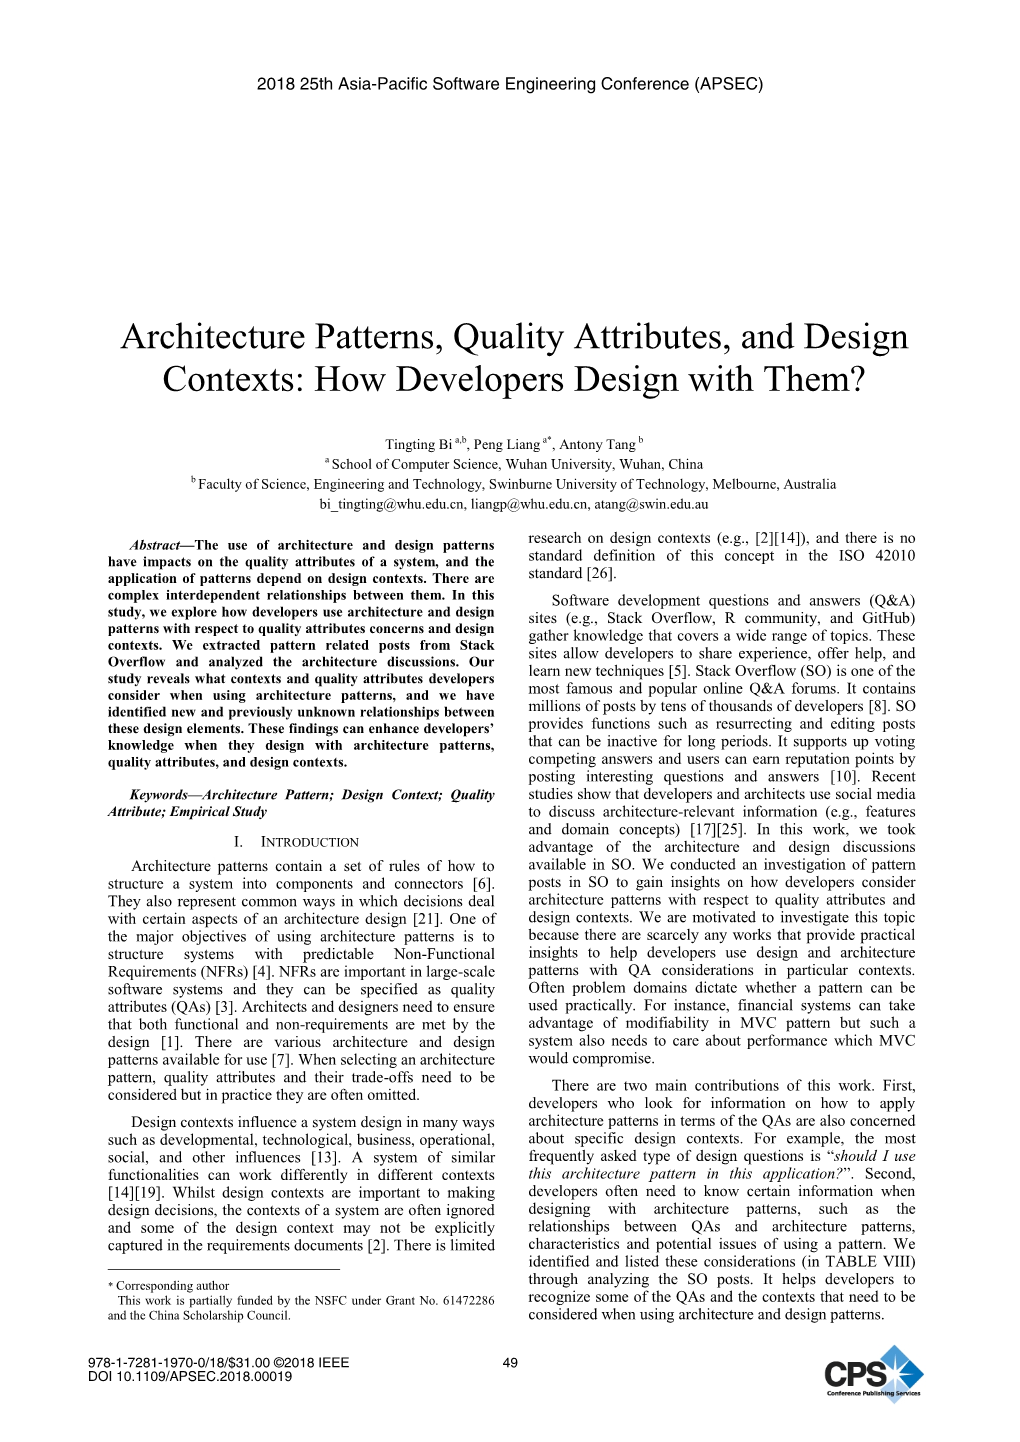 Architecture Patterns, Quality Attributes, and Design Contexts: How Developers Design with Them?